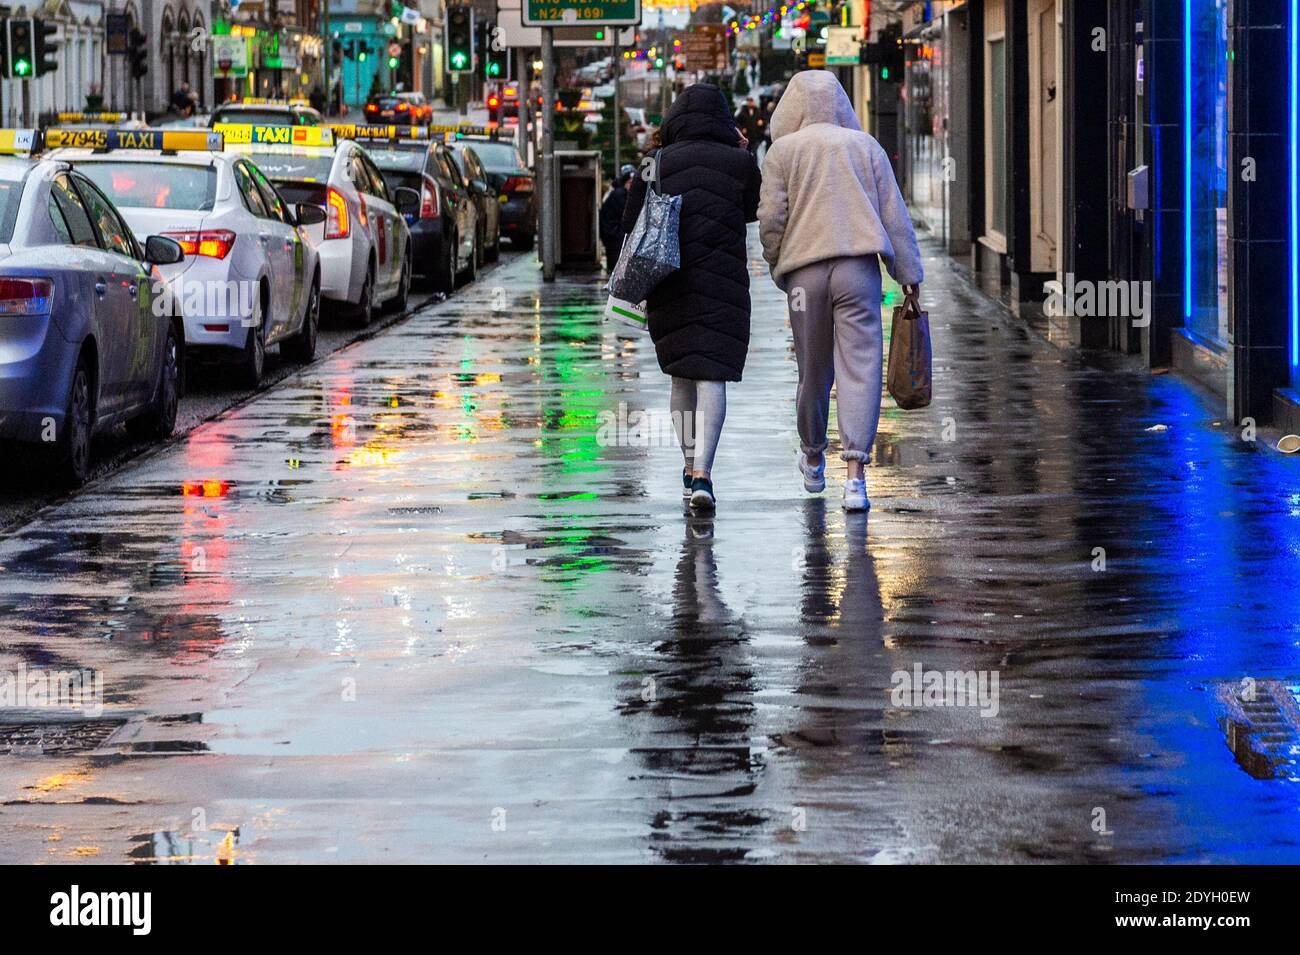 Limerick, Ireland. 26th Dec, 2020. People make their way home after shopping in Limerick before Storm Bella hits the country. Met Éireann has issued a status yellow wind warning for the whole country, which is valid until 6am tomorrow morning. Credit: AG News/Alamy Live News Stock Photo